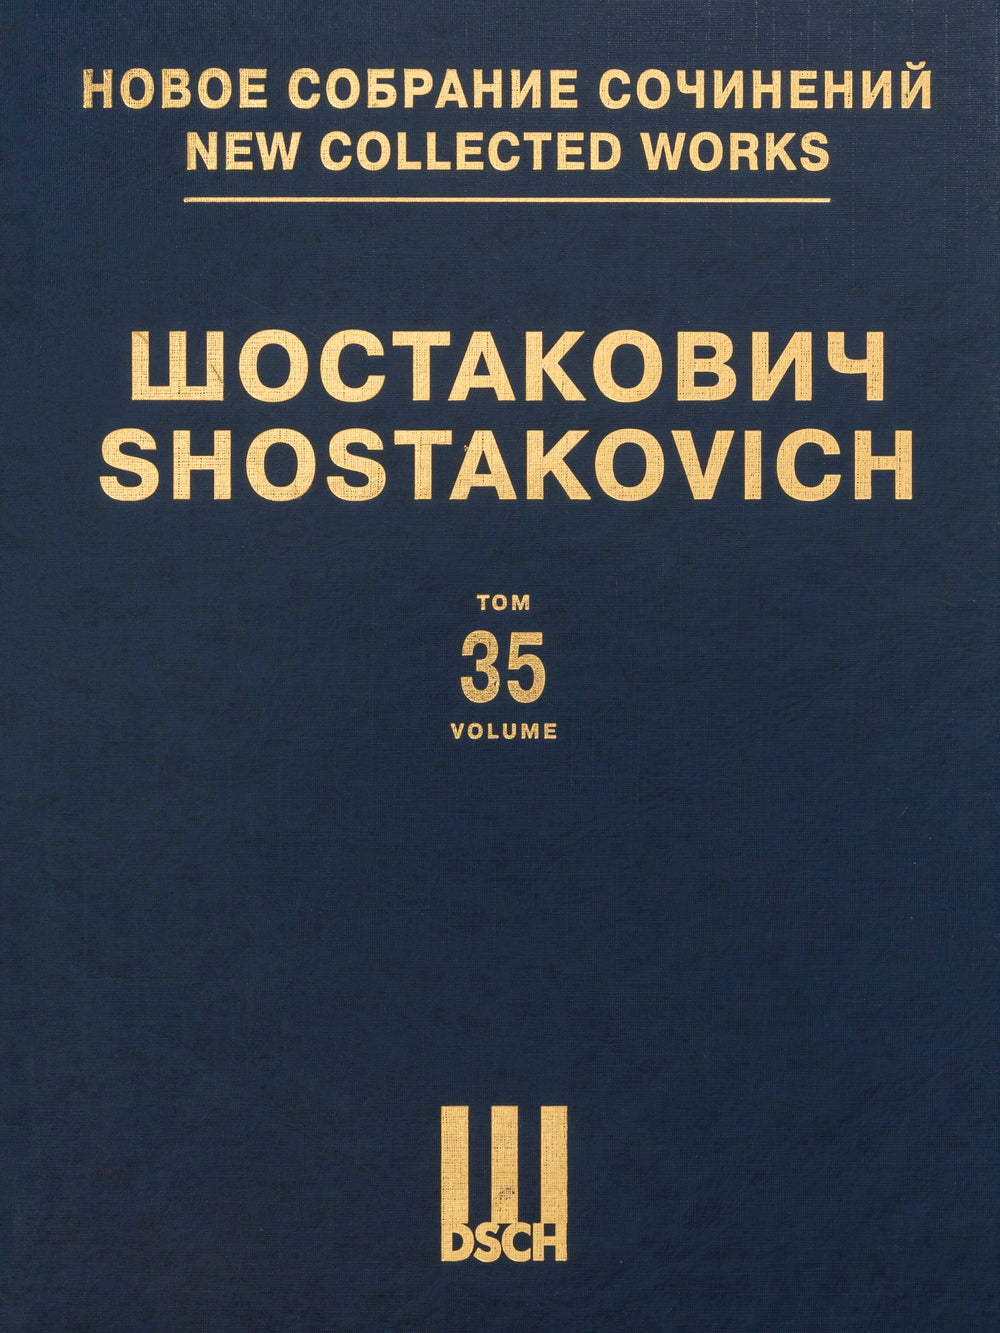 Shostakovich: Orchestral Overtures of the 1950s-1960s